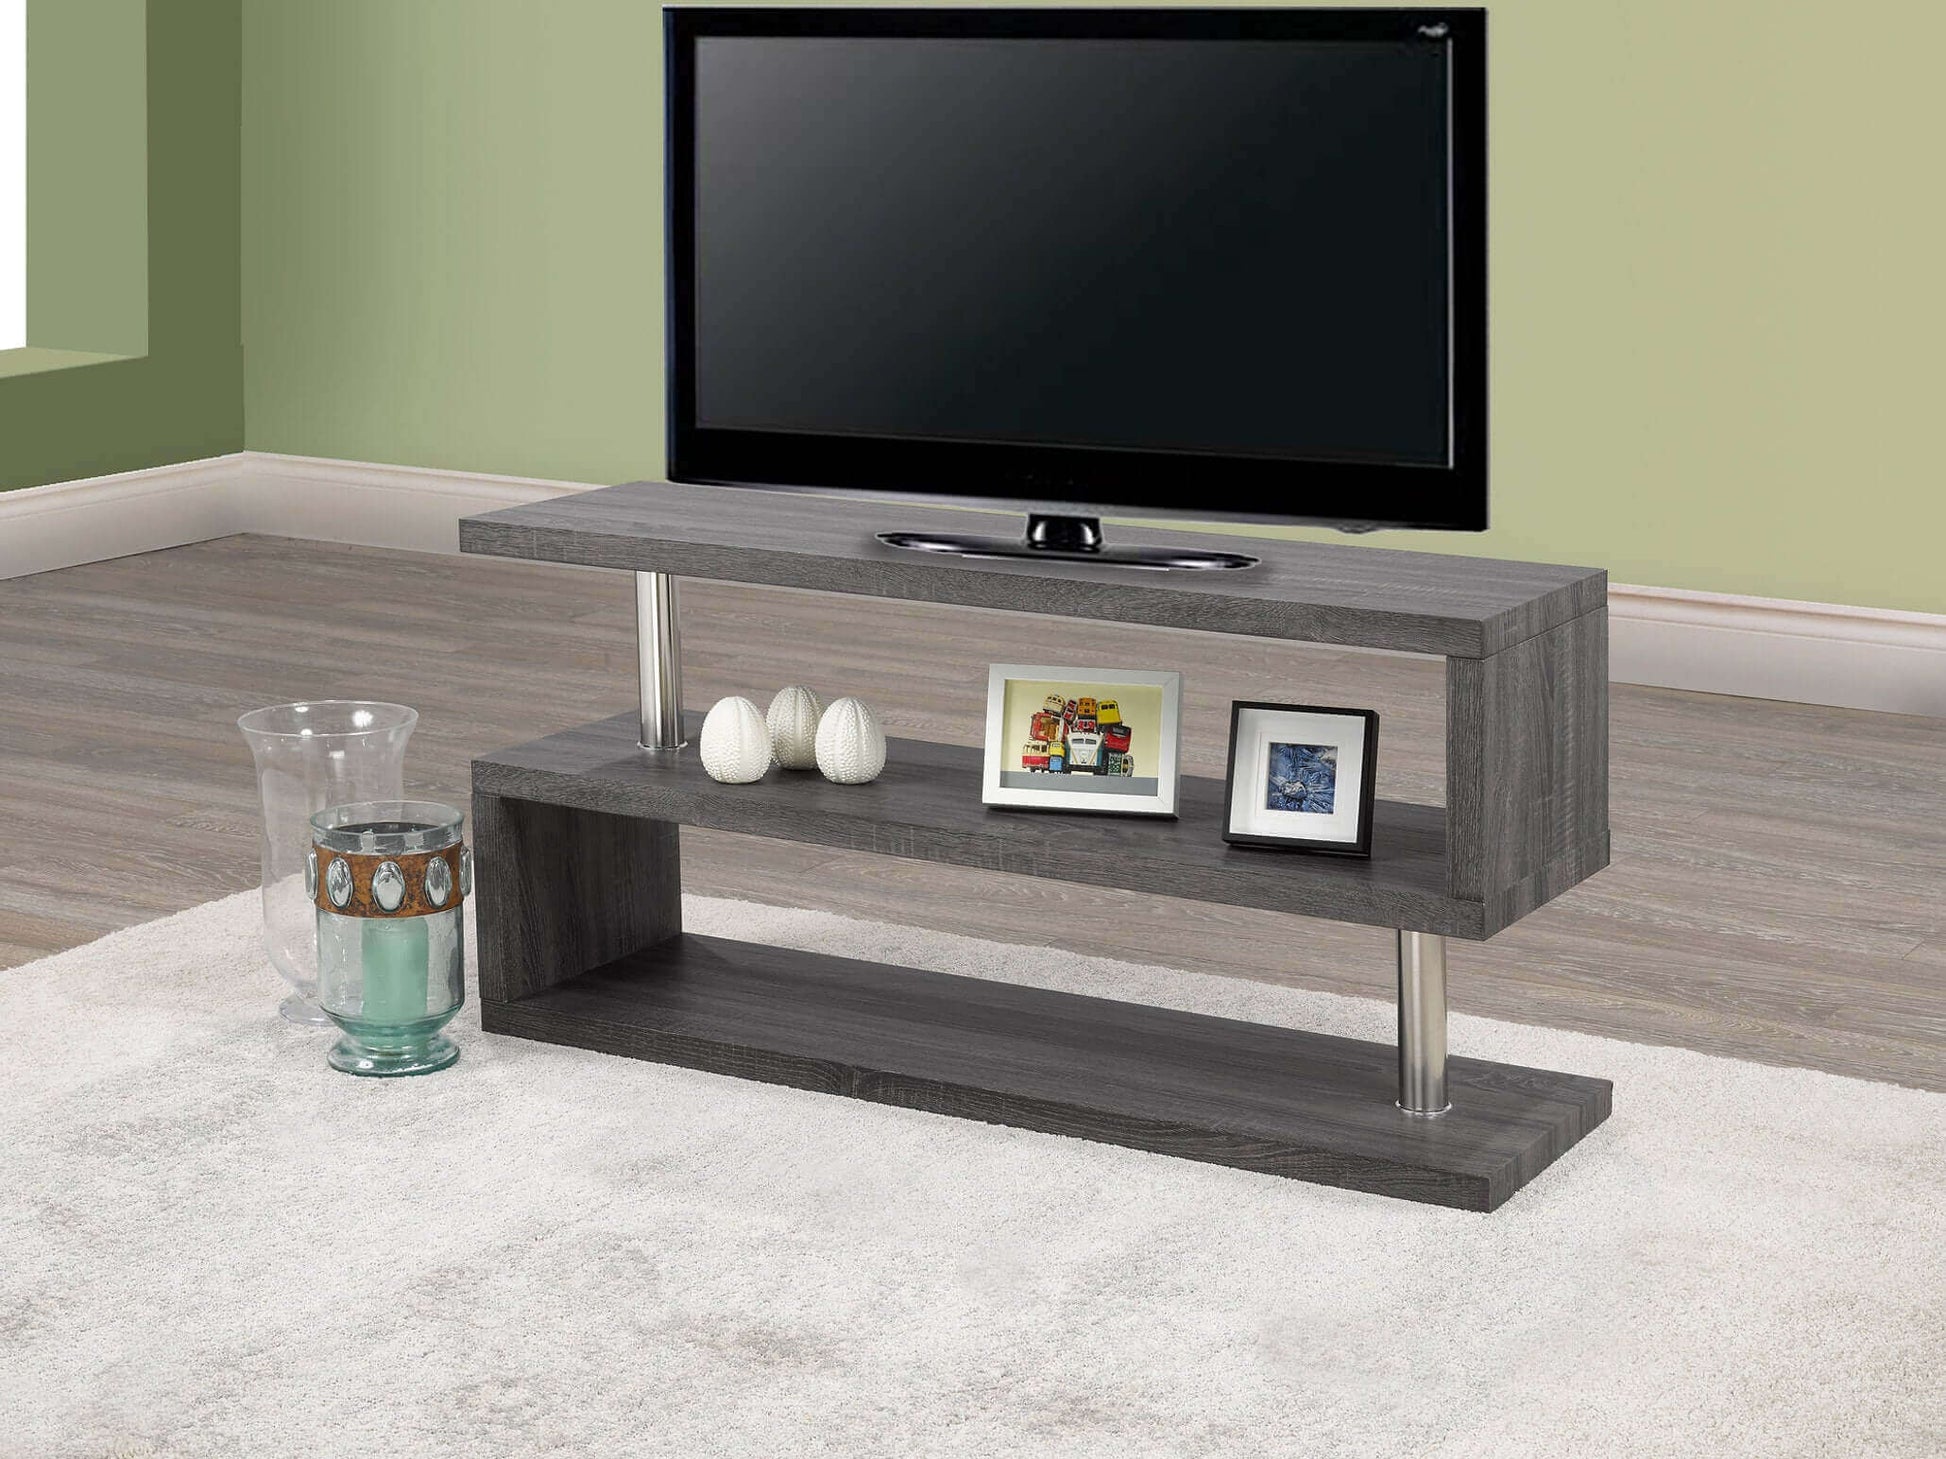 International Furniture Distribution Centre - Grey Wood Finish TV Stand with Chrome Accents - IF 5018